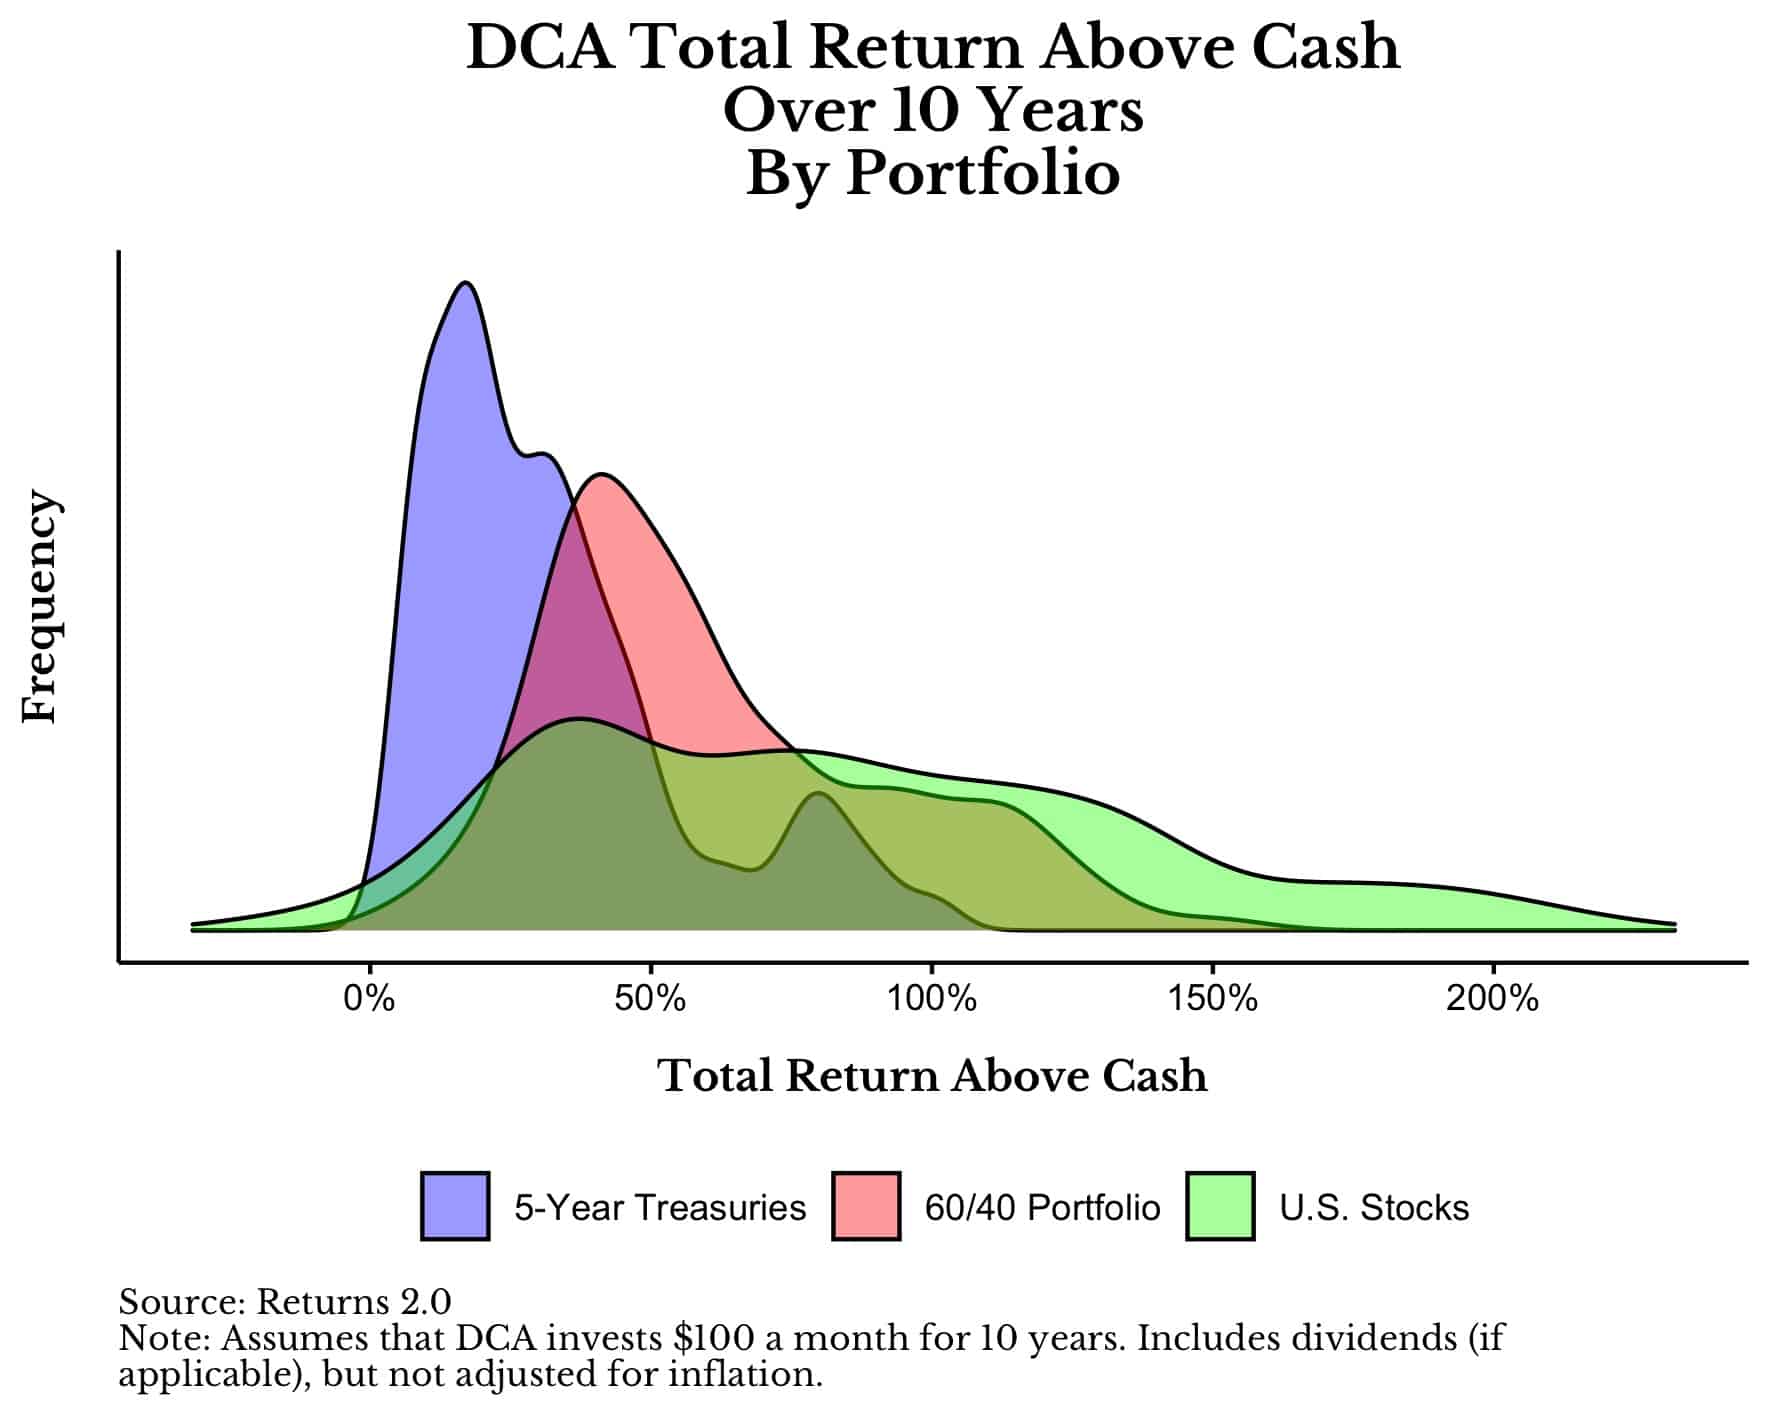 DCA total return above cash distributions for 5-Year Treasuries, a 60/40 portfolio, and US stocks